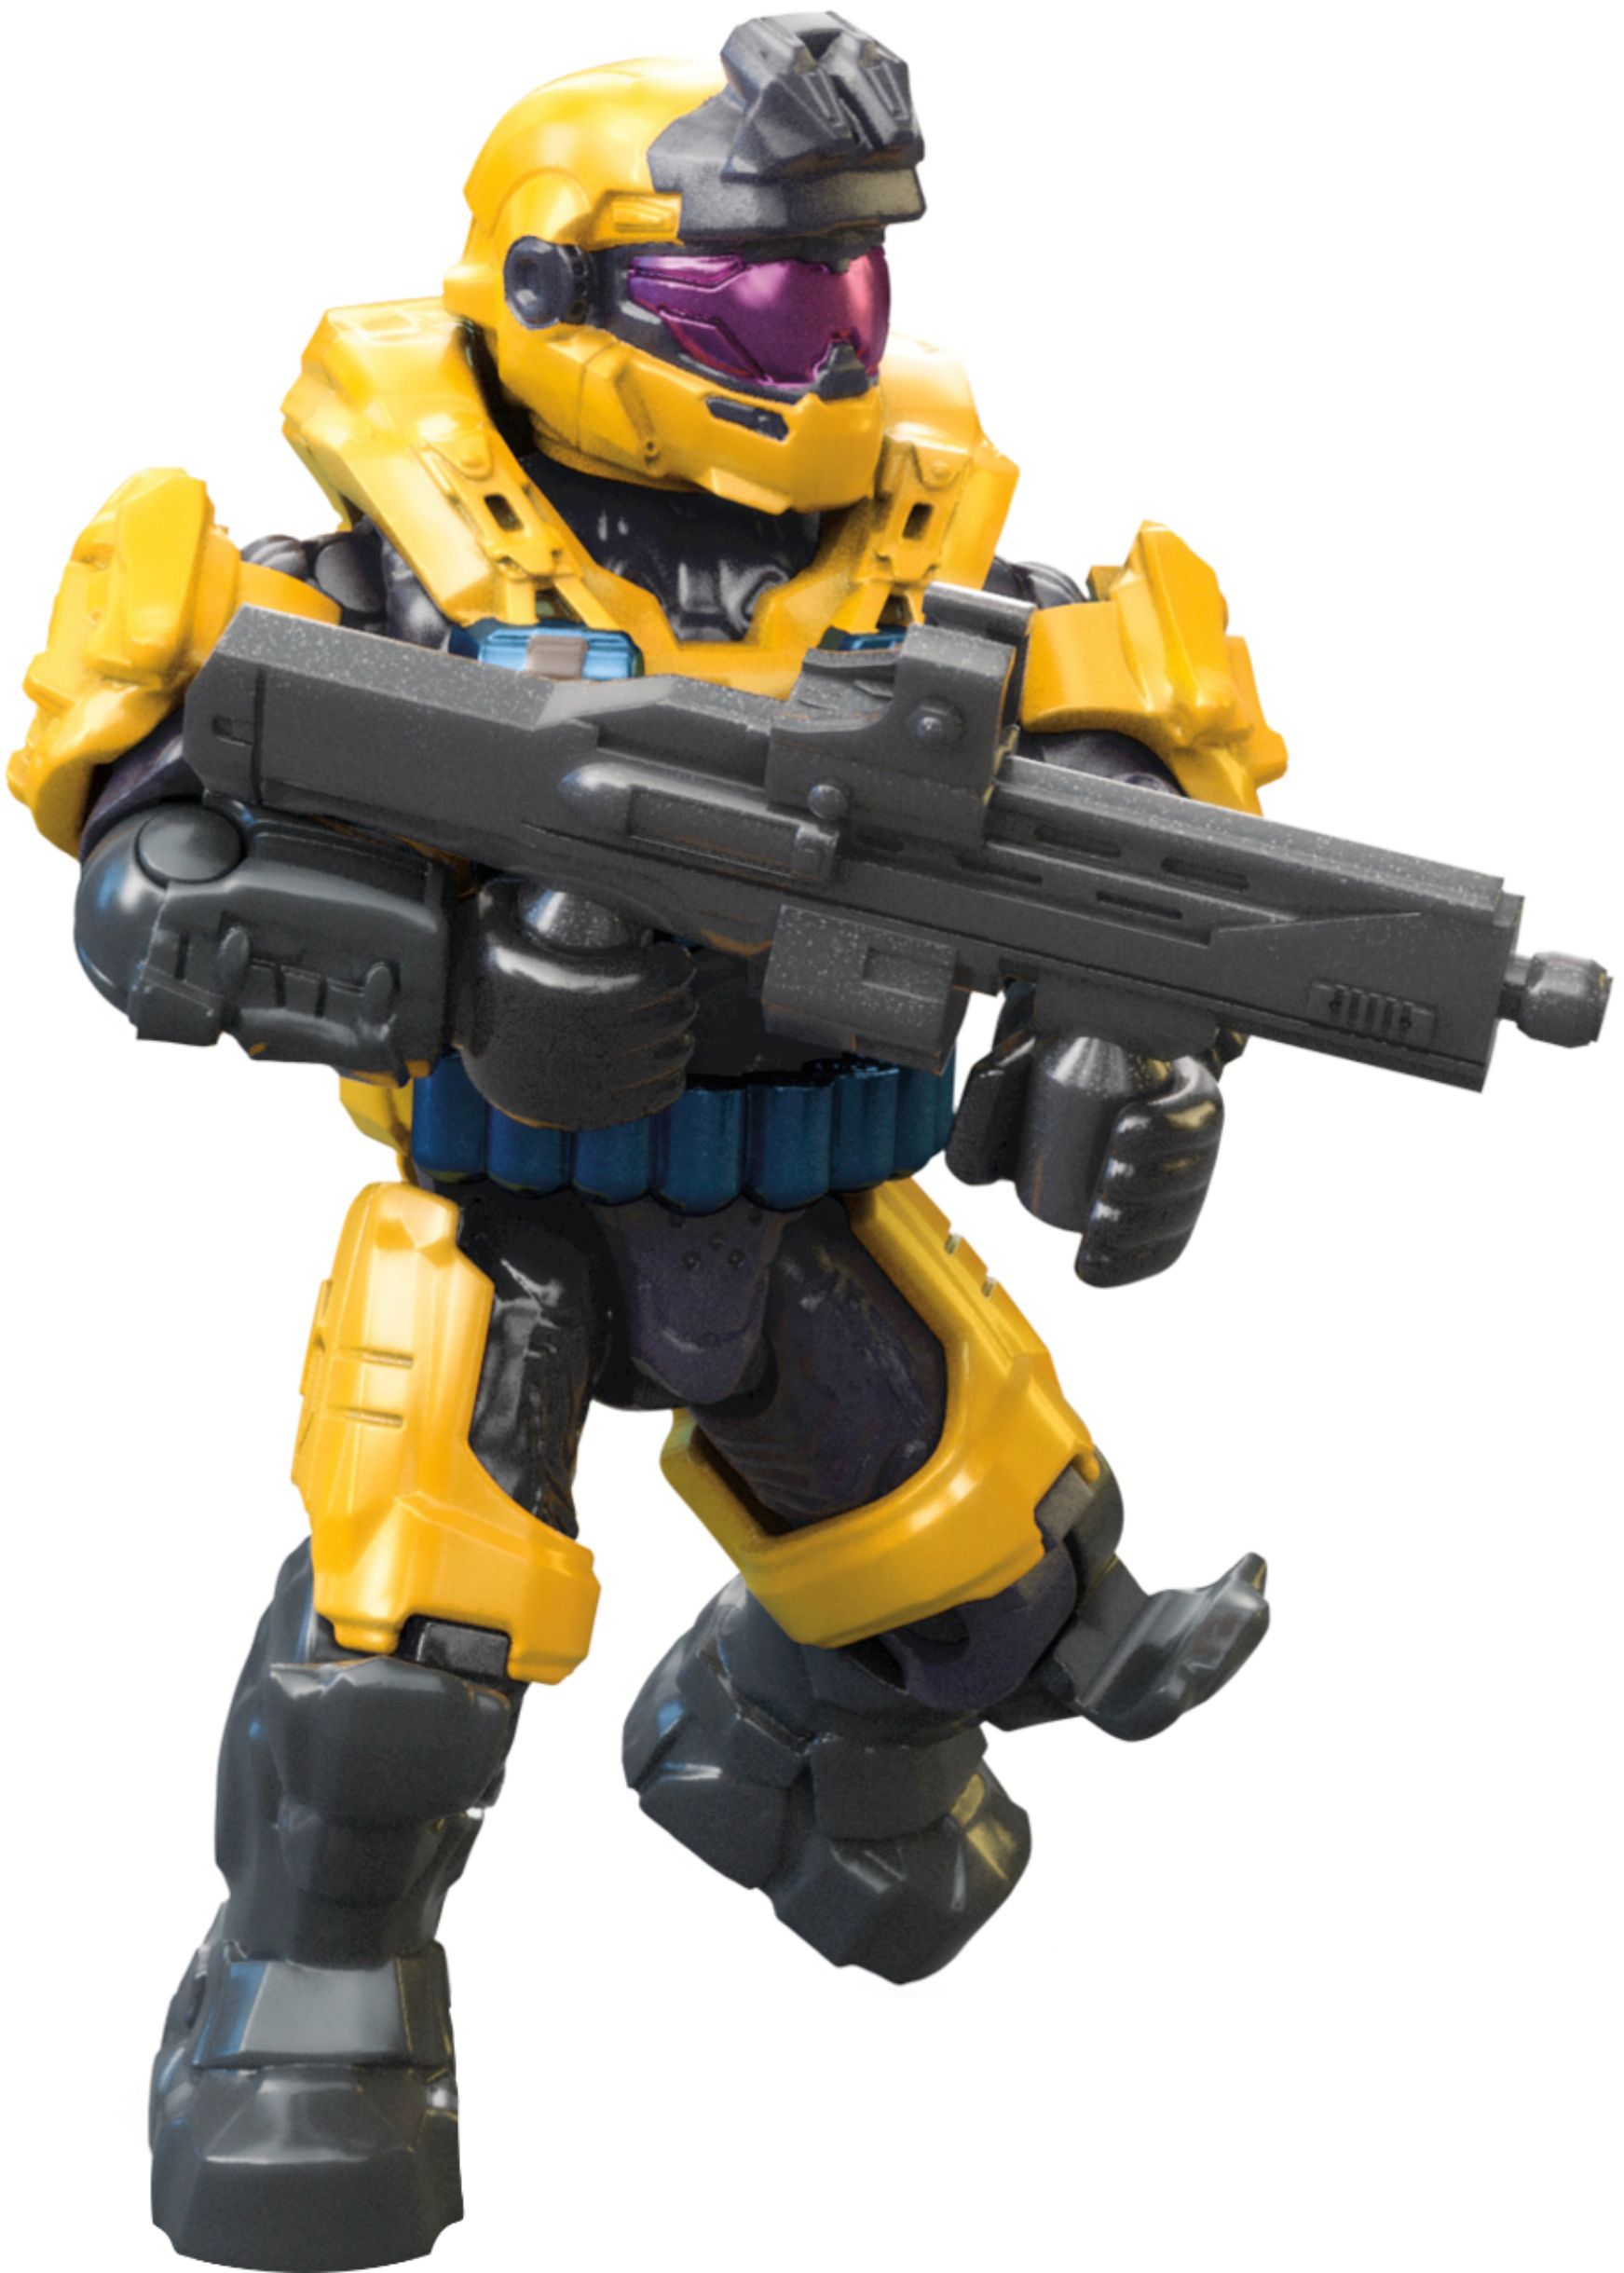 Best Buy: Mega Construx Halo UNSC Armor Pack Asst Styles May Vary Multi  GRN06